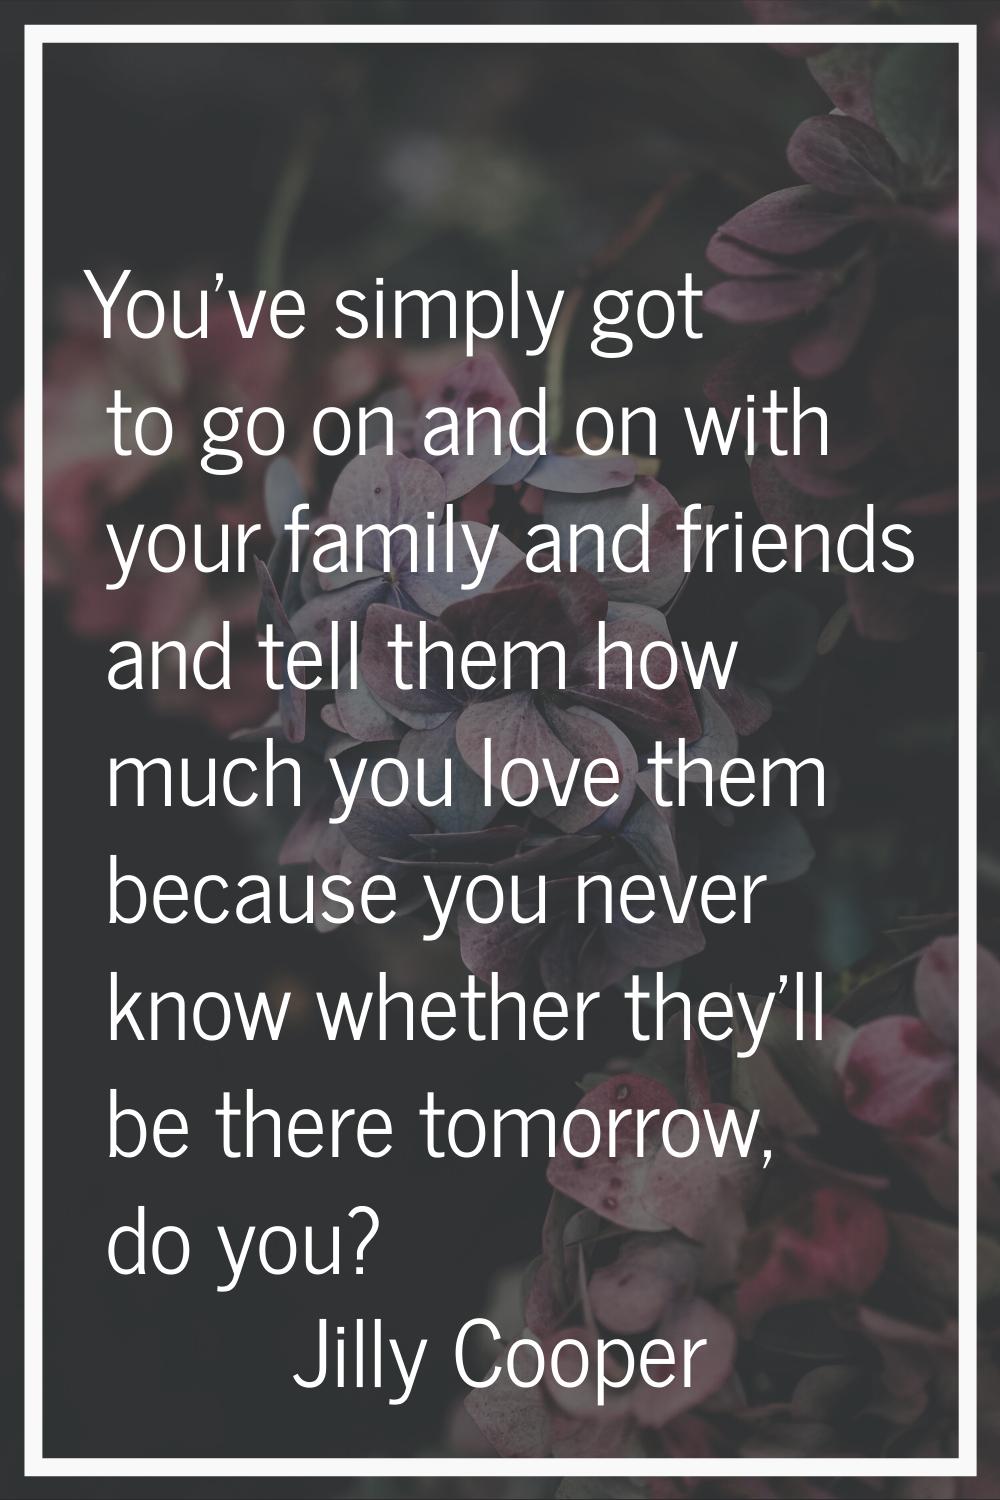 You've simply got to go on and on with your family and friends and tell them how much you love them